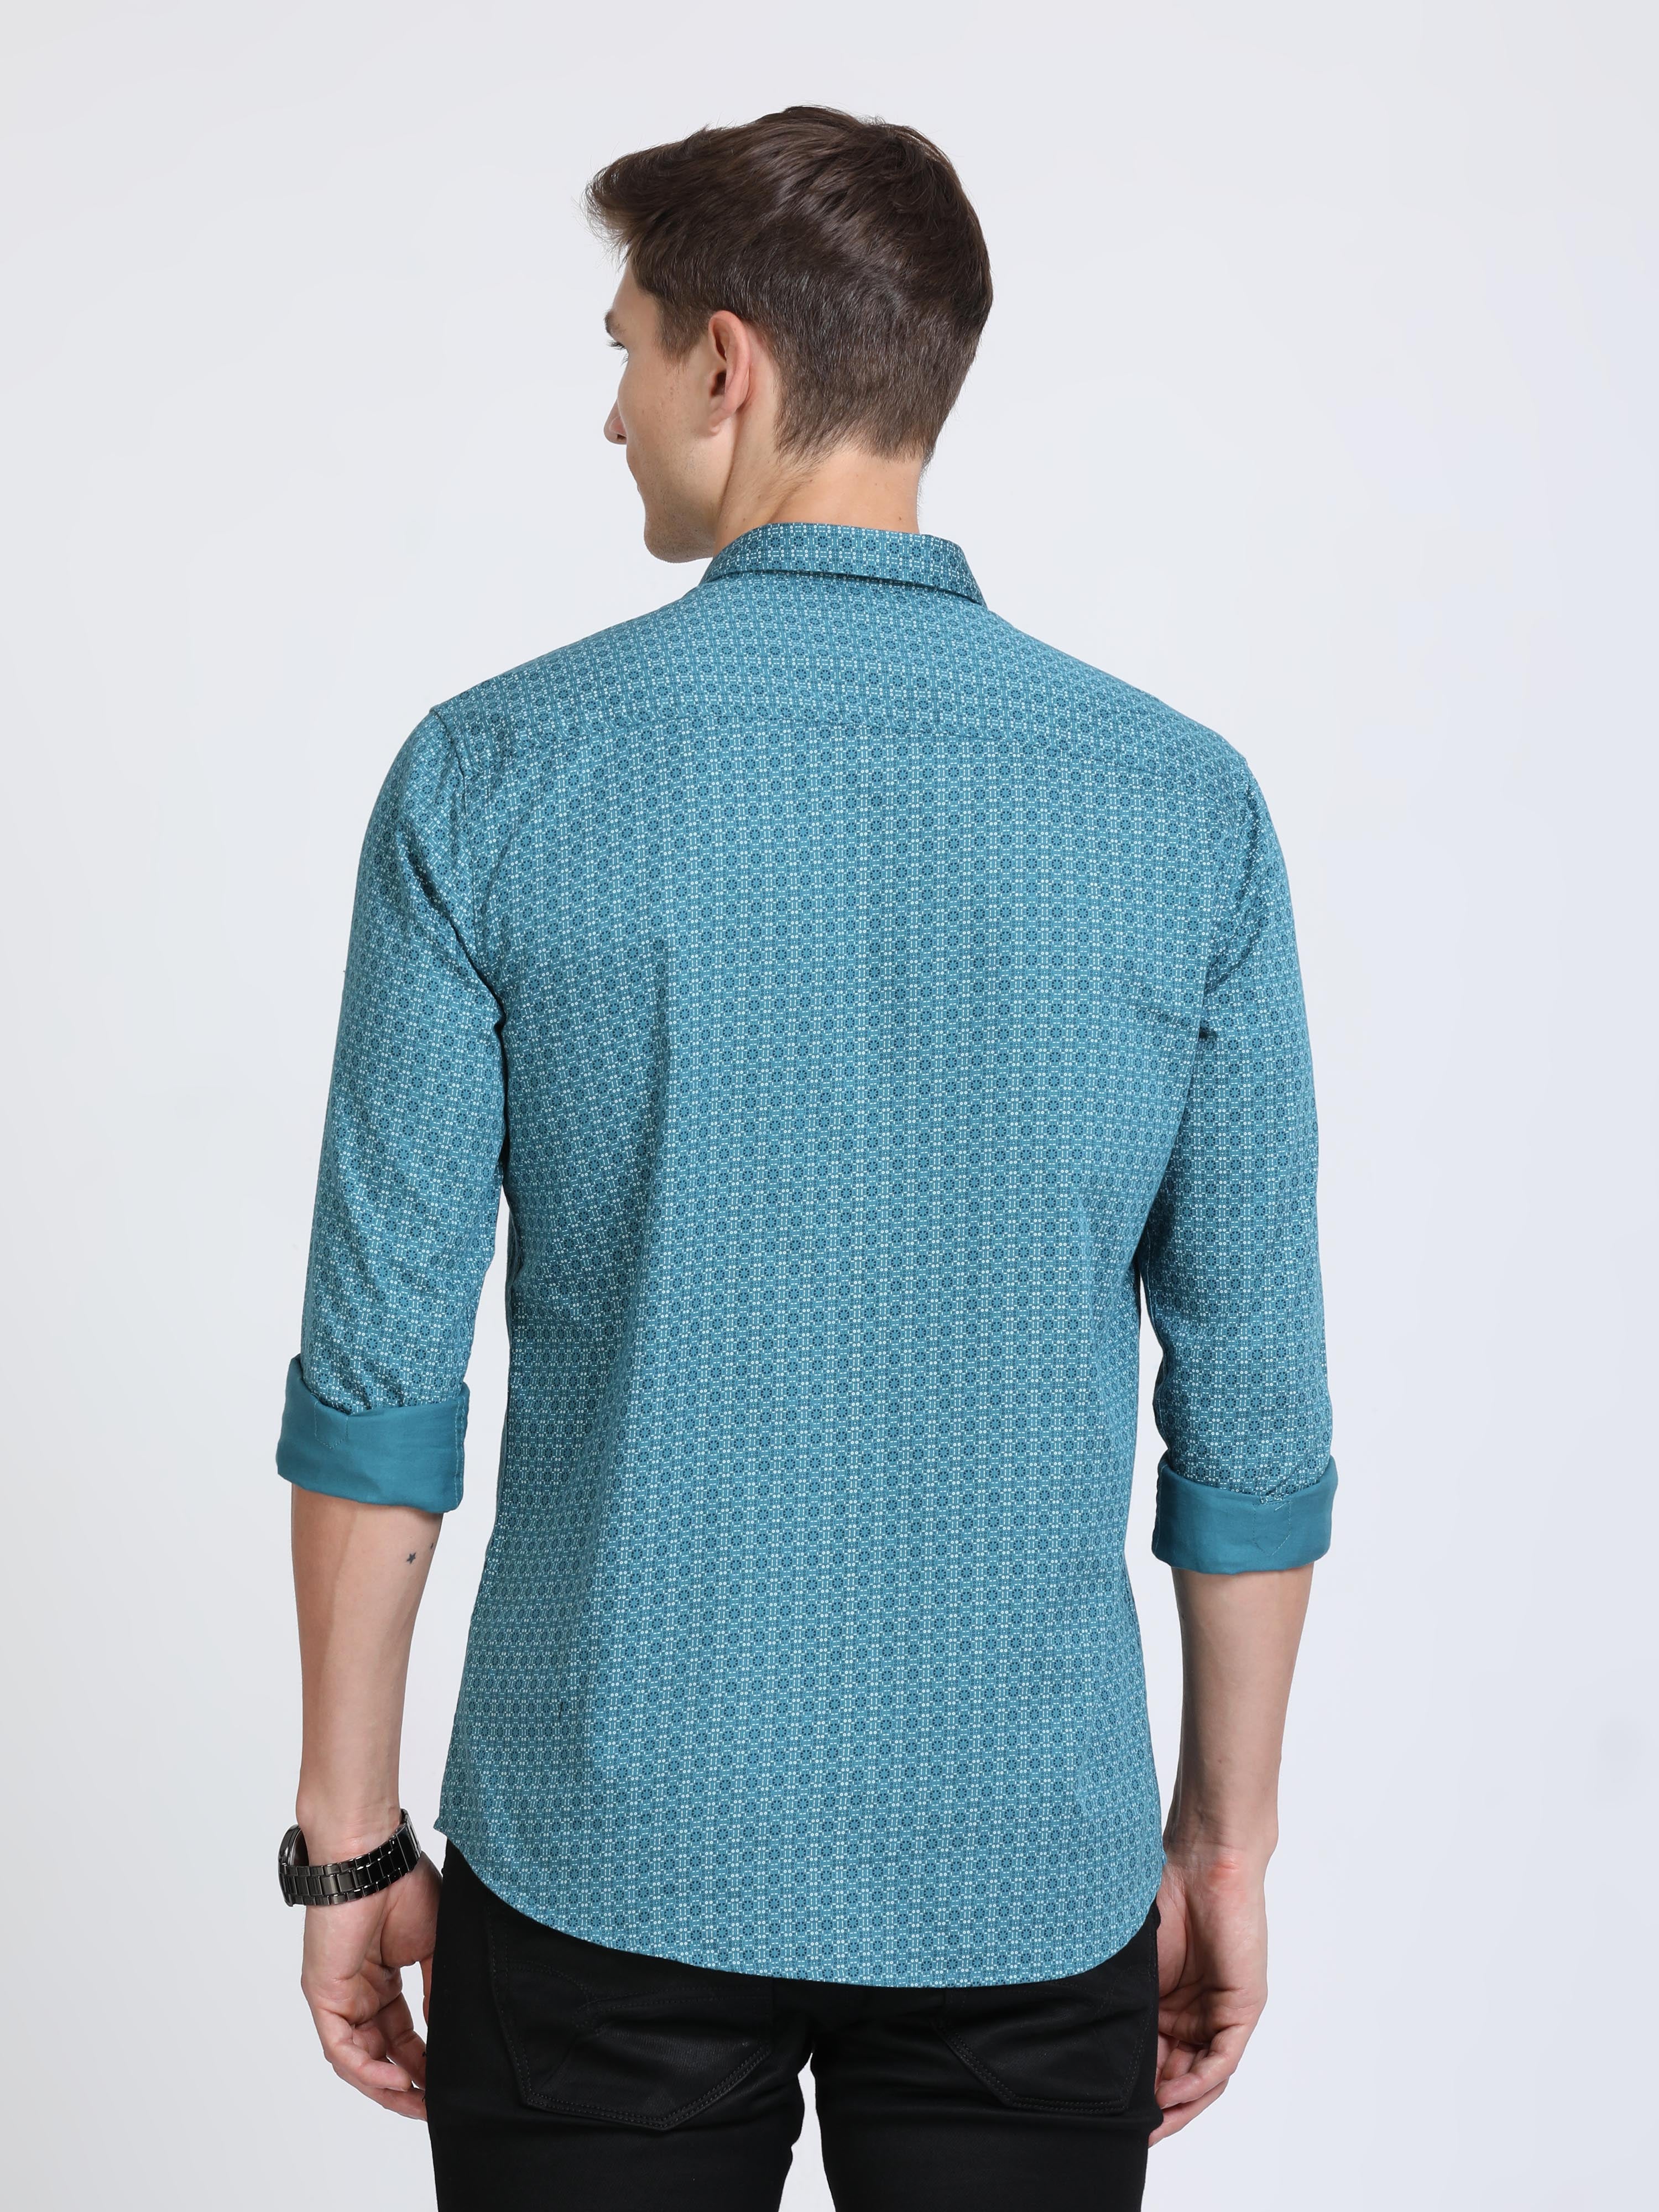 Classic Polo Mens Pure Cotton Polo Neck Printed Full Sleeves Turquoise Color Woven Shirt | So2-171 A-Fs-Prt-Sf